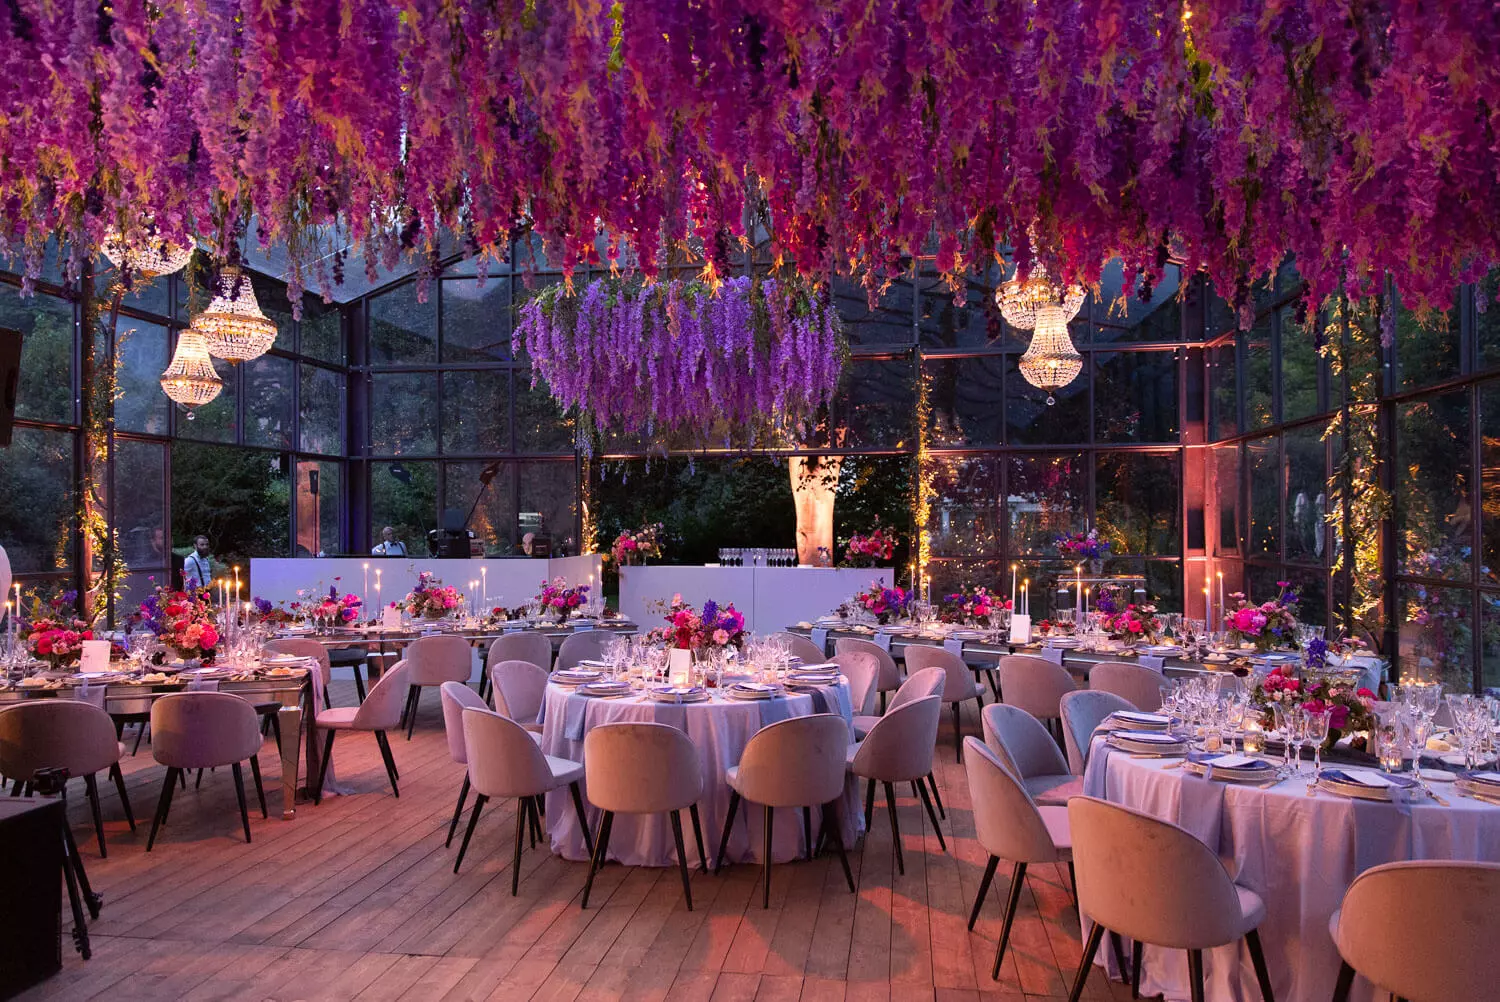 Beautiful wedding event produced by Leslie Mastin Events. Wedding venue decorated with purple floral